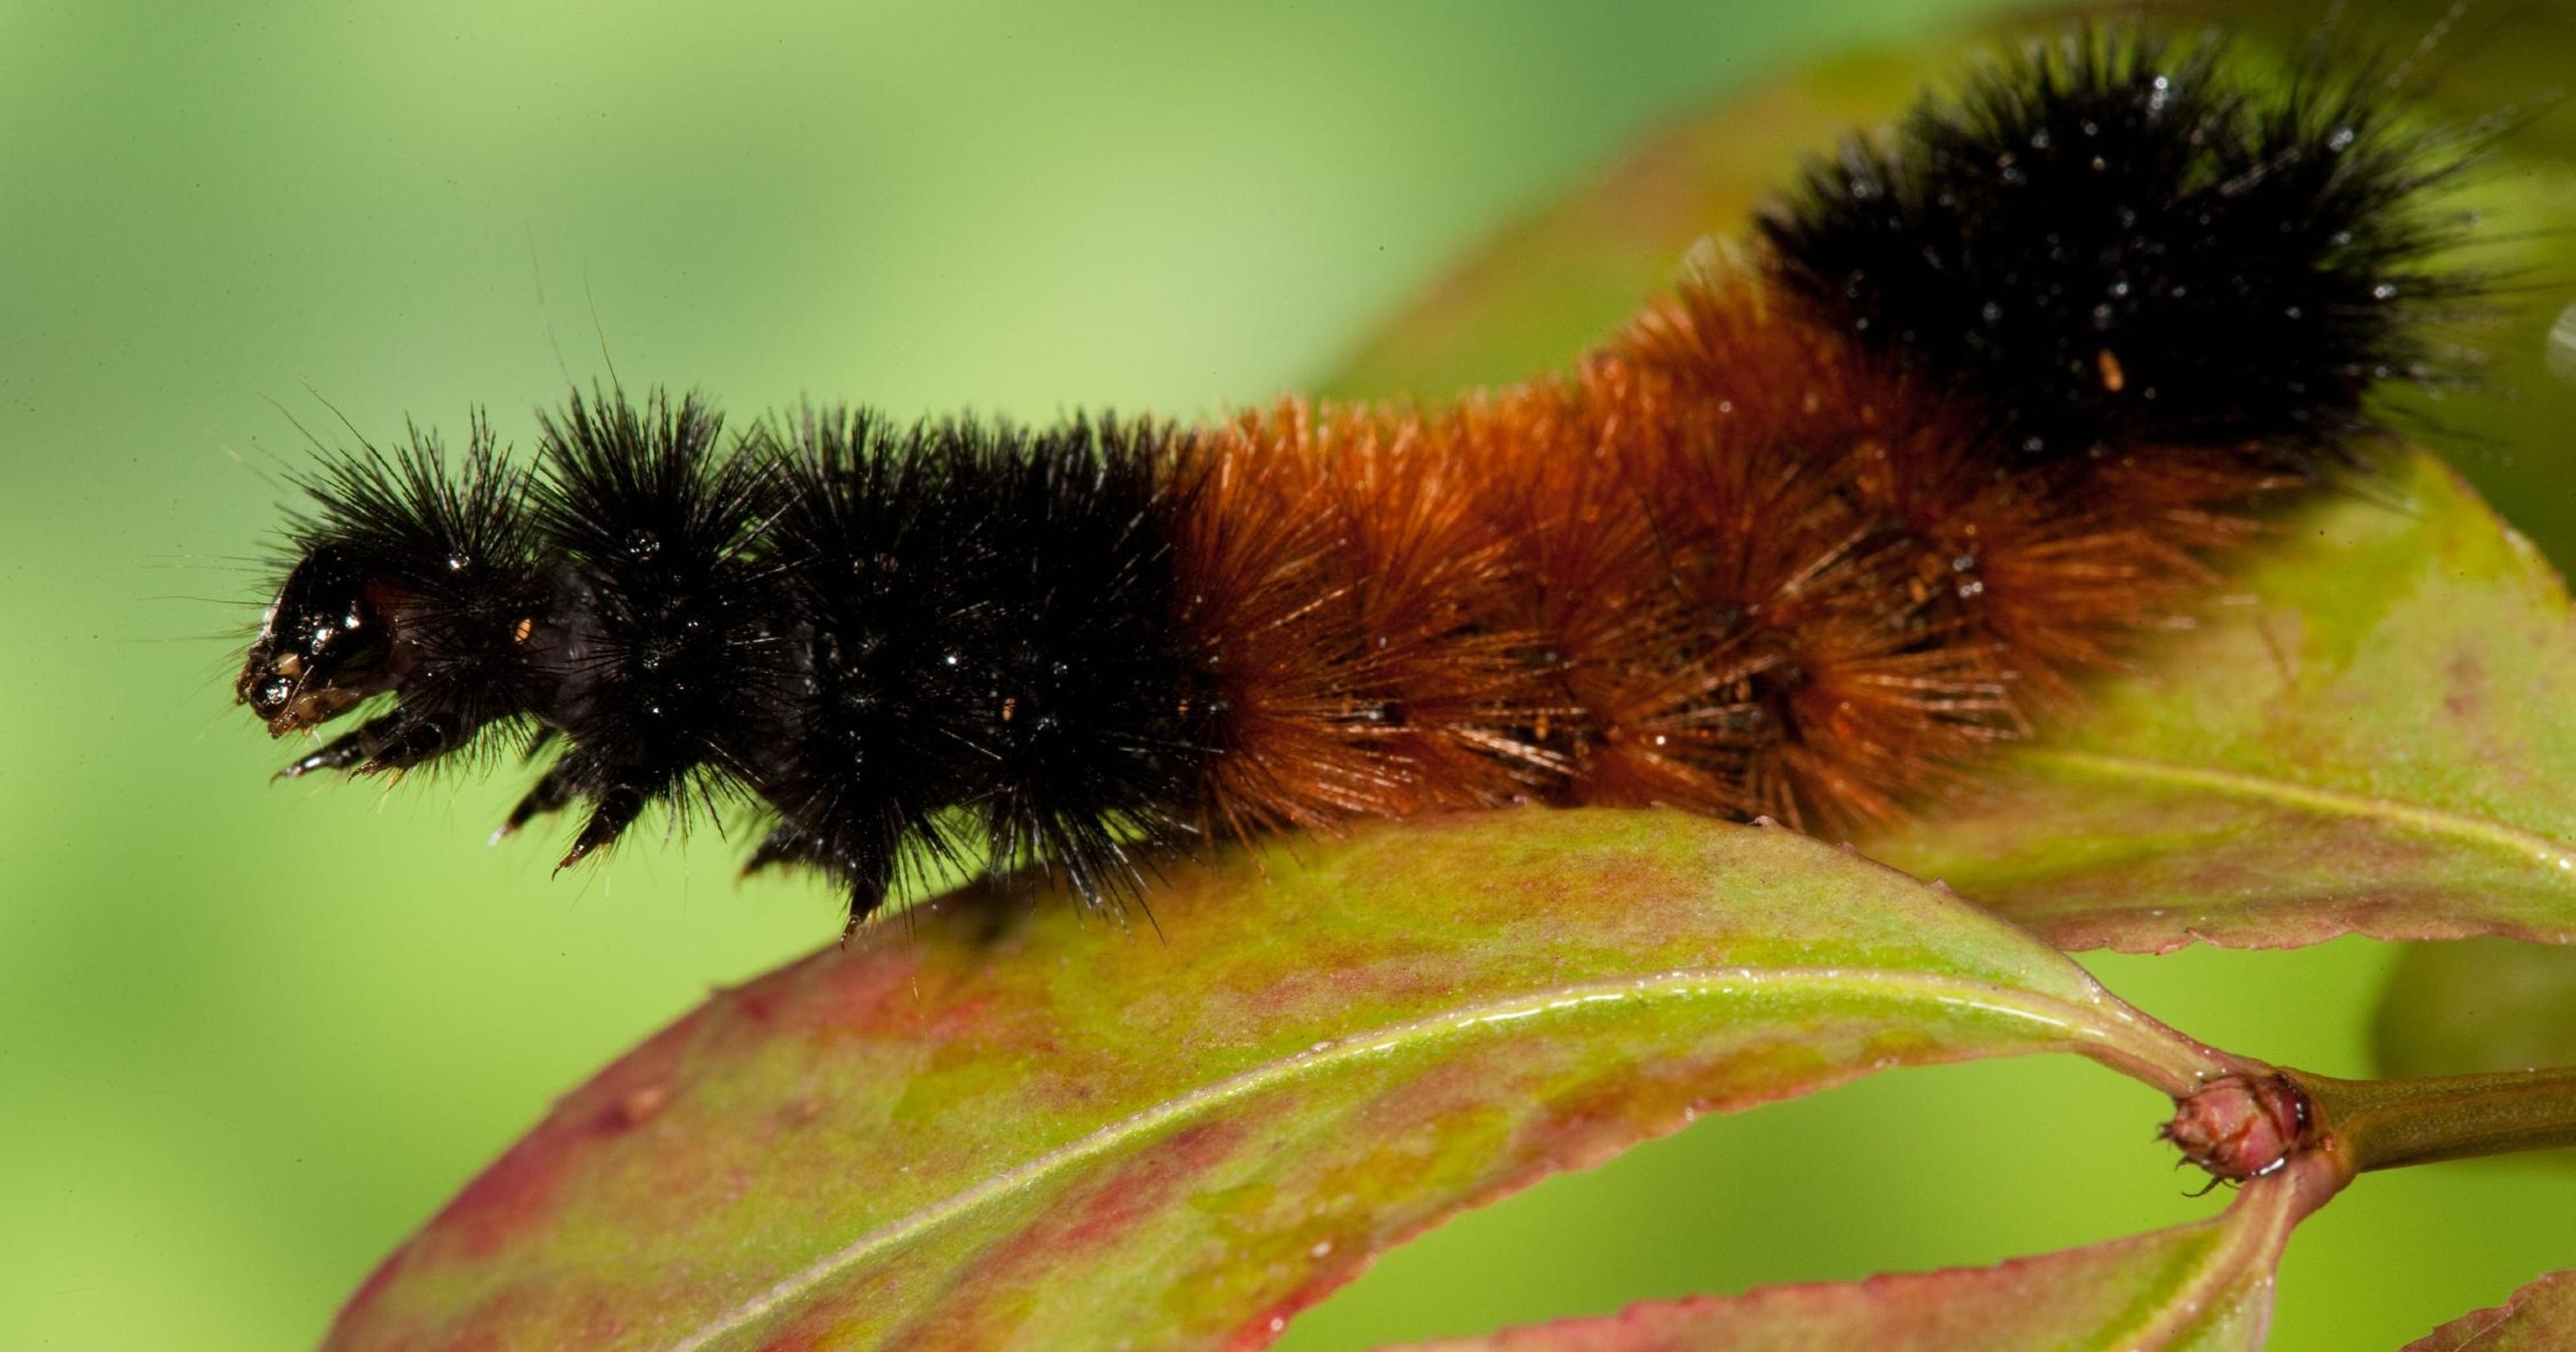 Is a caterpillar an insect? What about maggots or grubs?